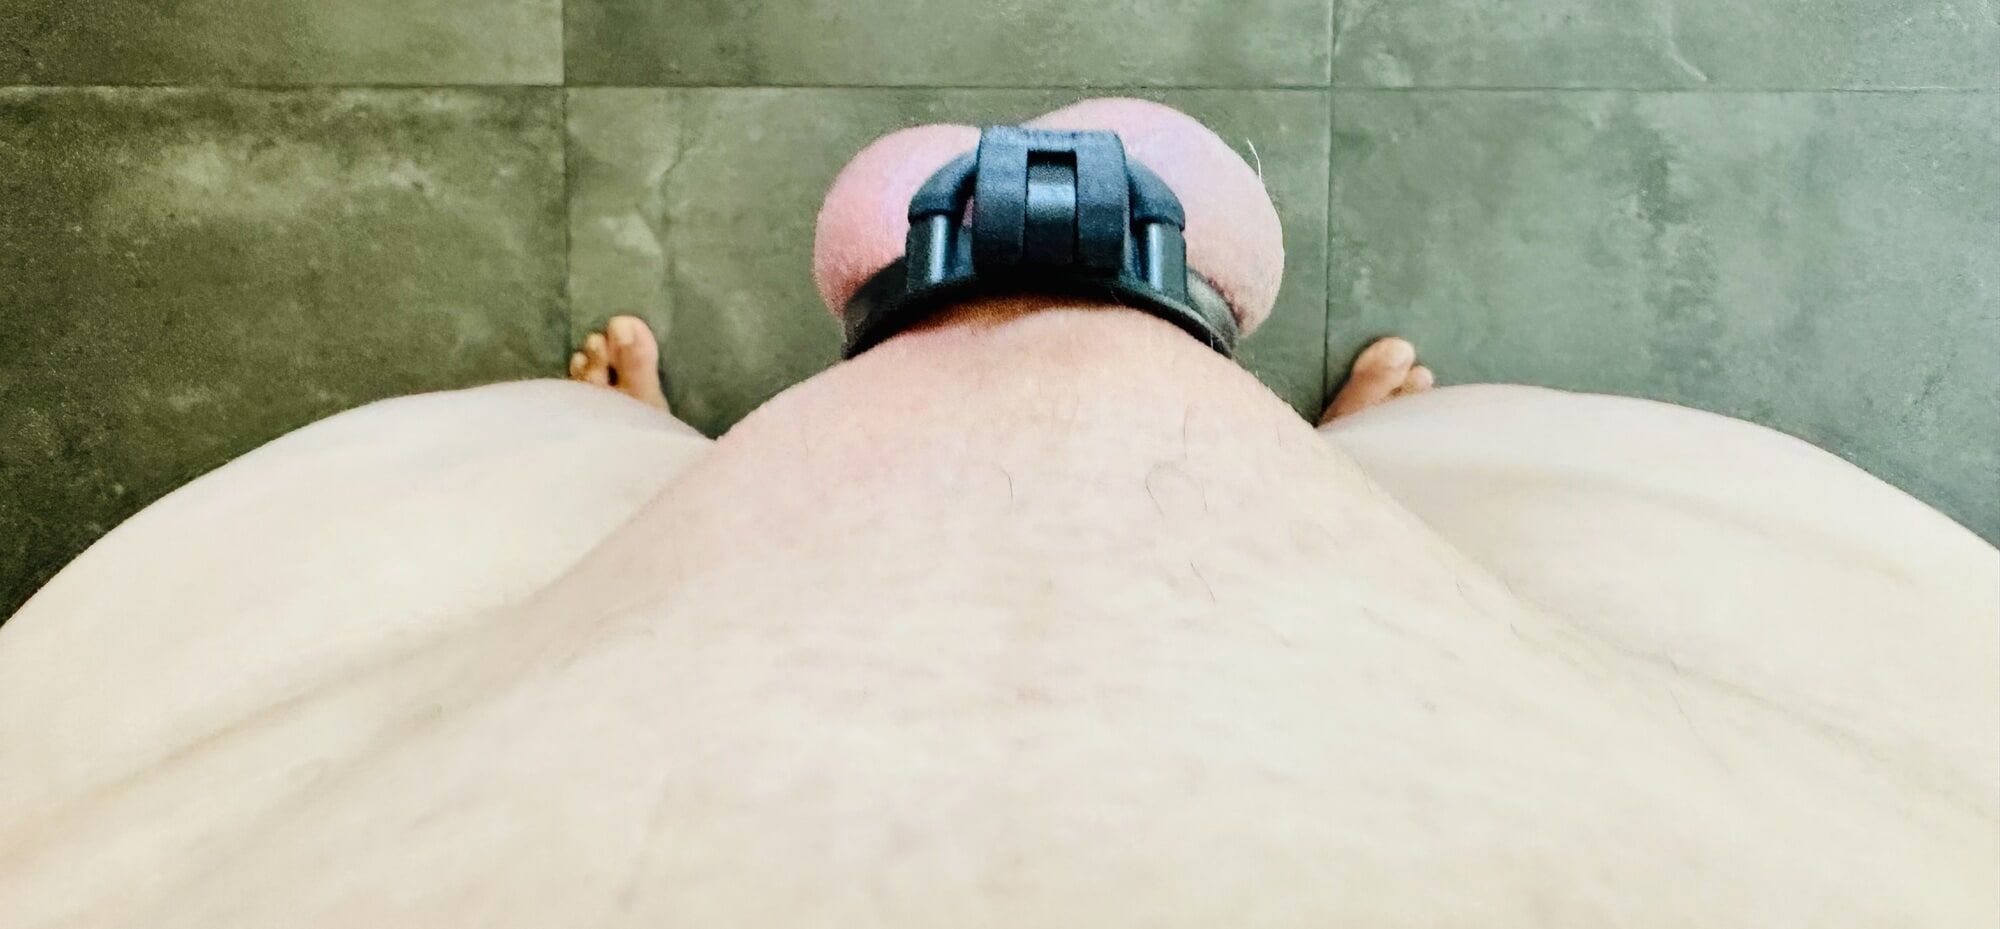 My sweet penis in a mini chastity belt #2